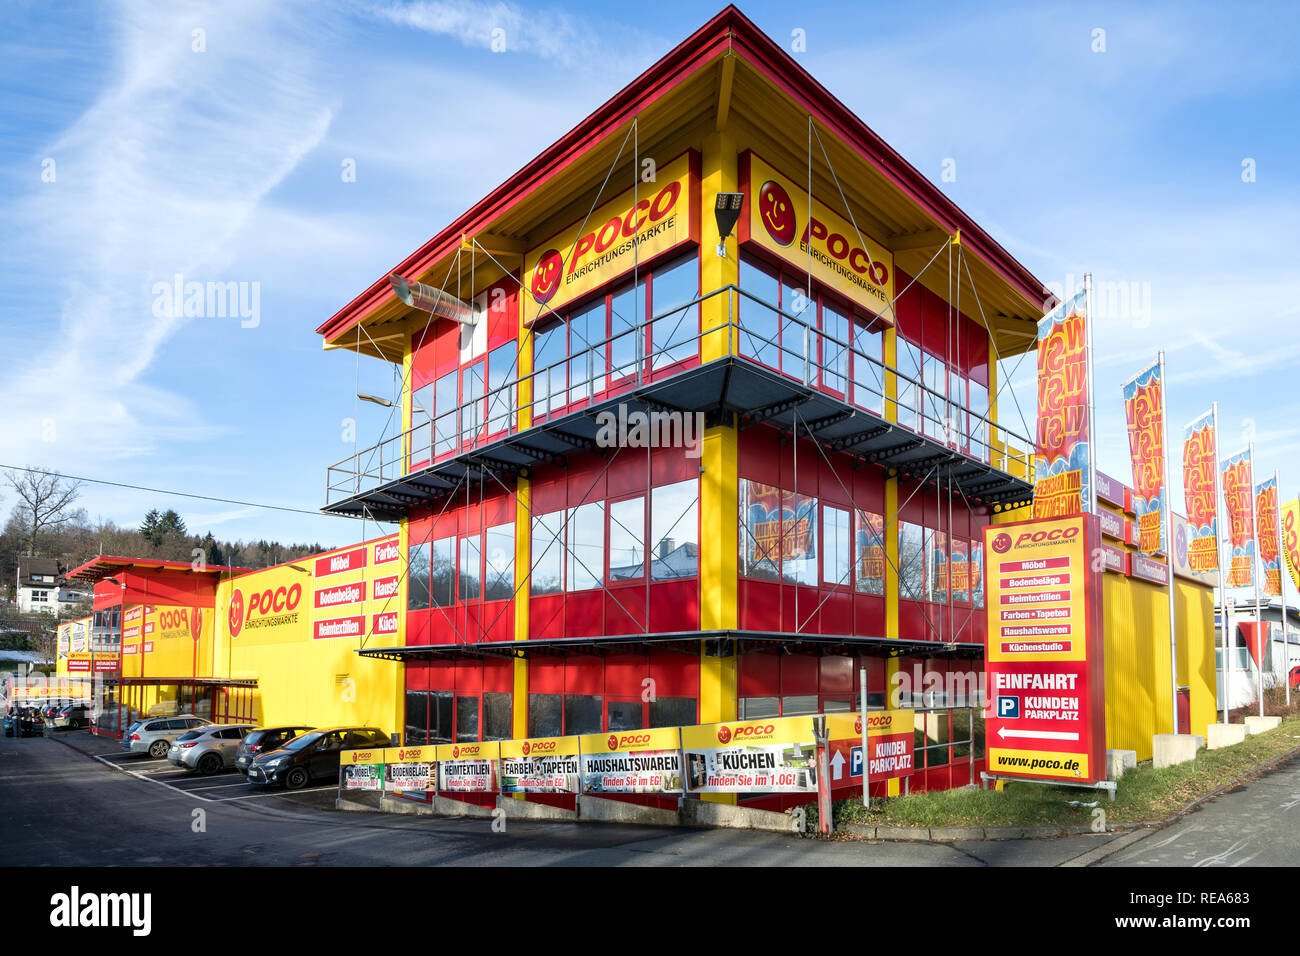 Poco furniture store in Kreuztal. Poco is a furniture discount retailer with more than 120 stores in Germany and a brand of XXXLutz since 2018. Stock Photo